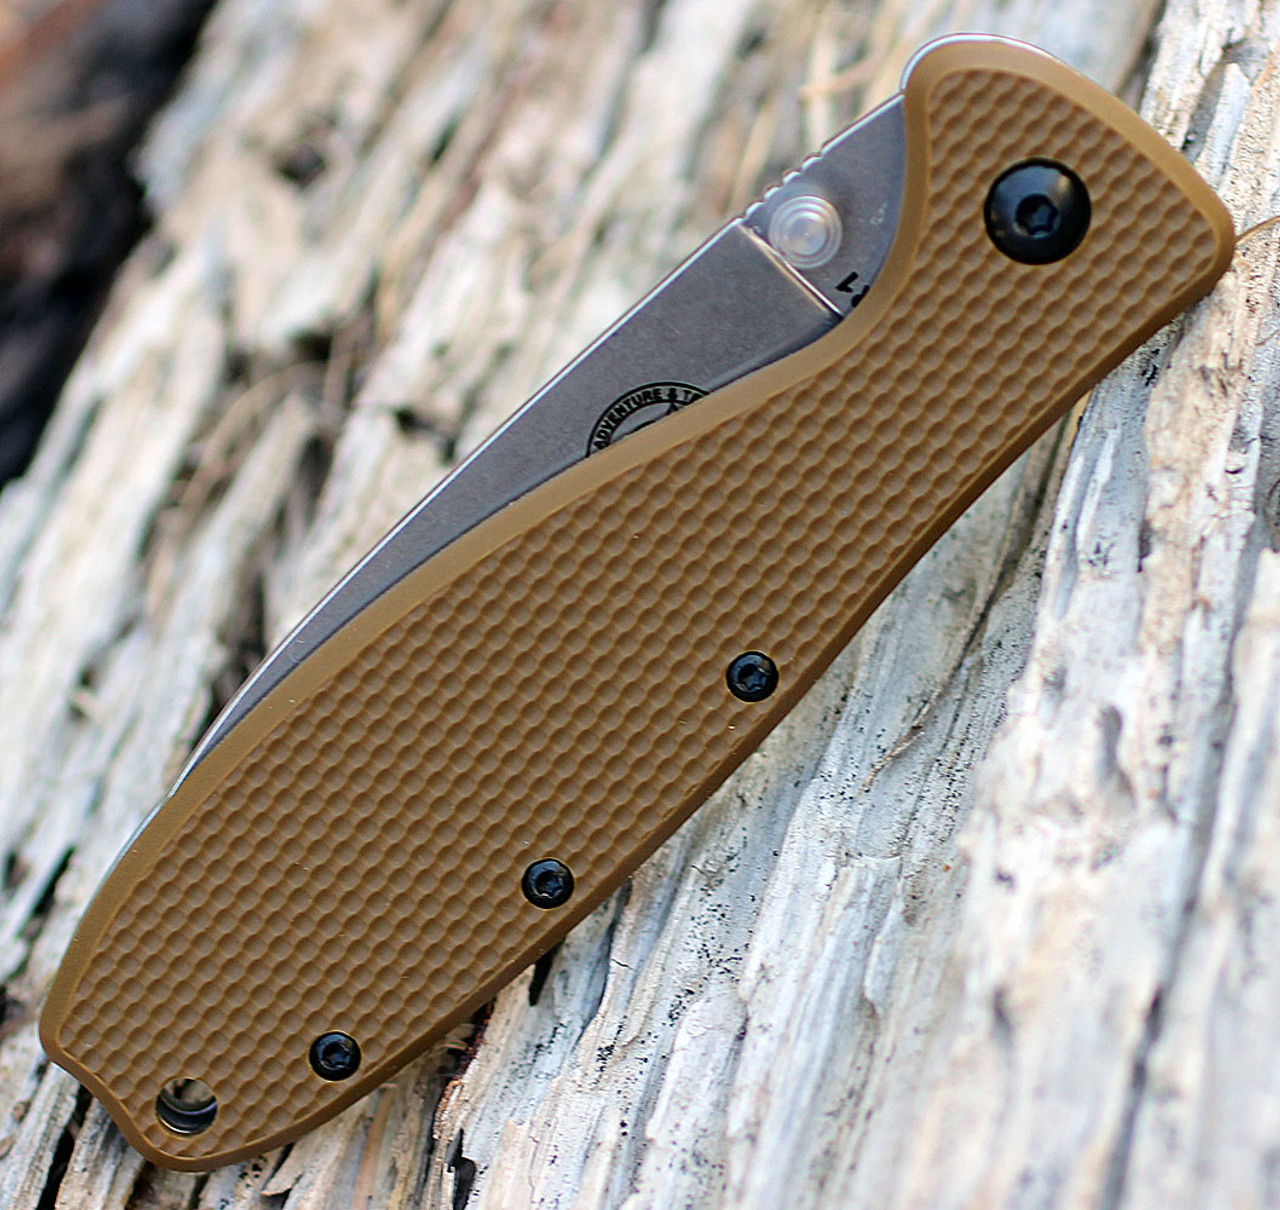 ESEE Zancudo Folding Knife (BRKR2CB)- 2.94" Stonewashed D2 Drop Point Blade, Coyote Brown Polymer Handle